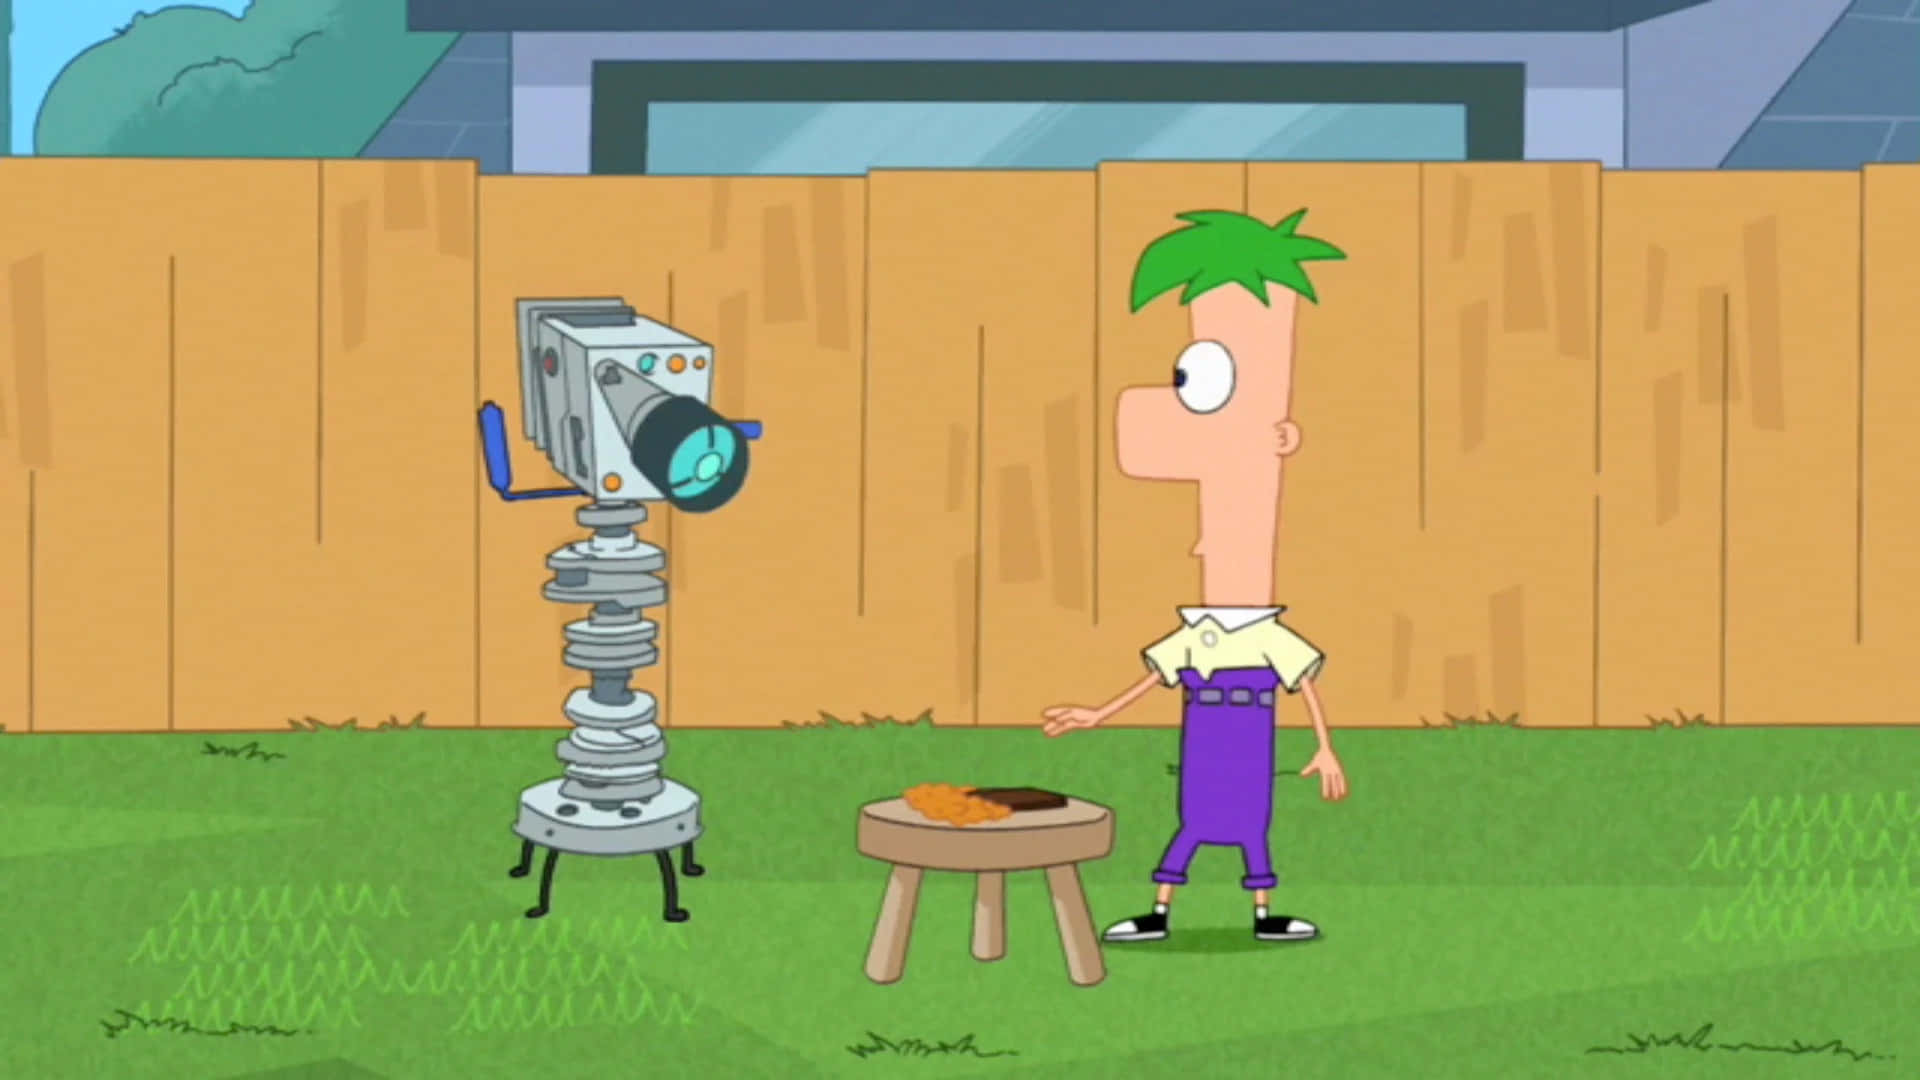 Phineas and Ferb Adventure Together in Colorful Background